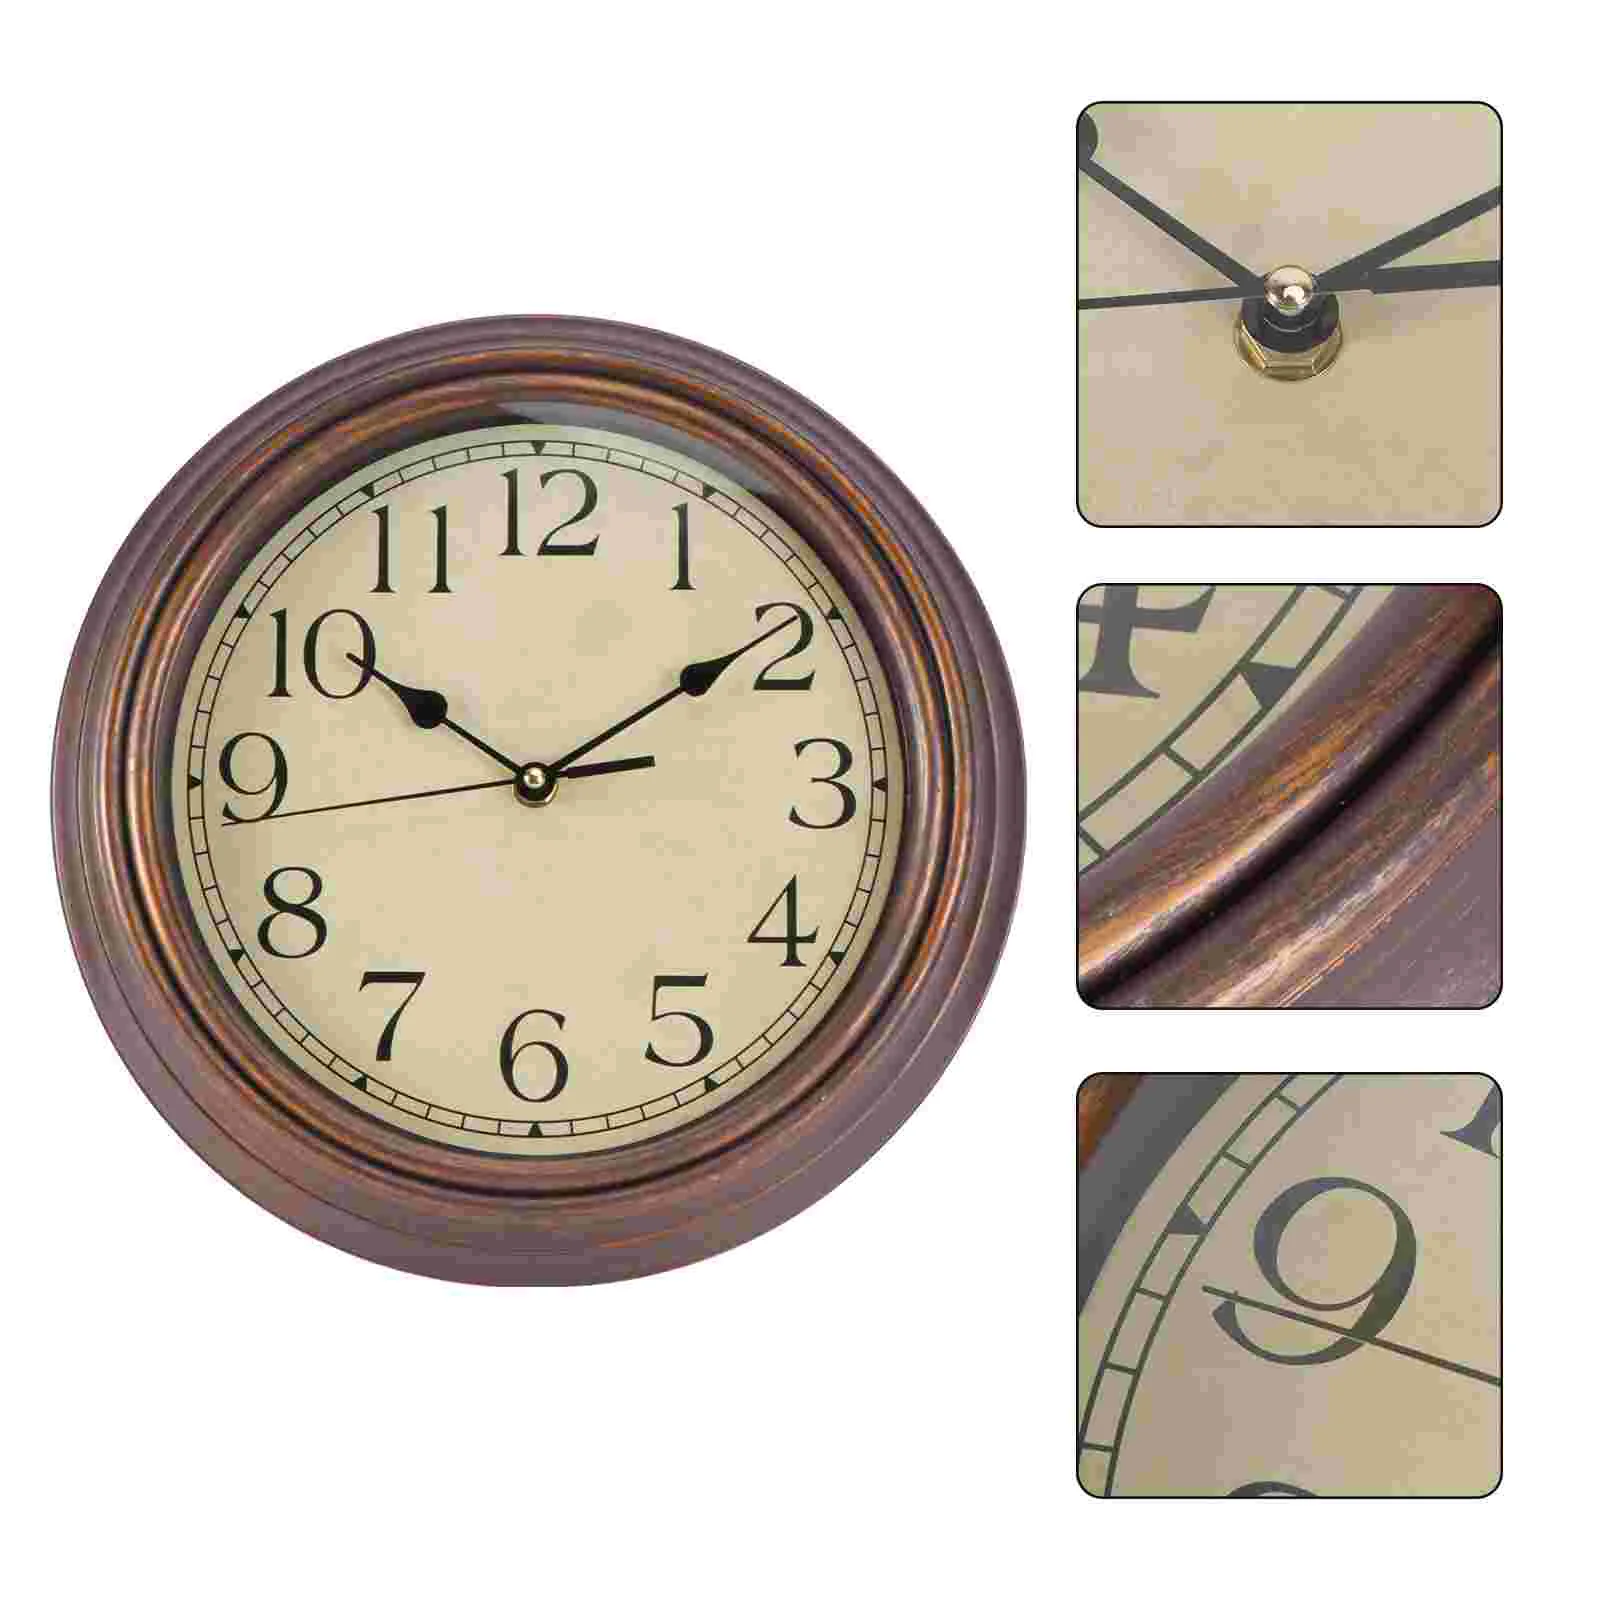 

Wall Clock Clocks Modern Retro Plastic Kitchen Vintage Unique Farmhouse Home Wake Rustic Hanging Bedroom Room Living Operated